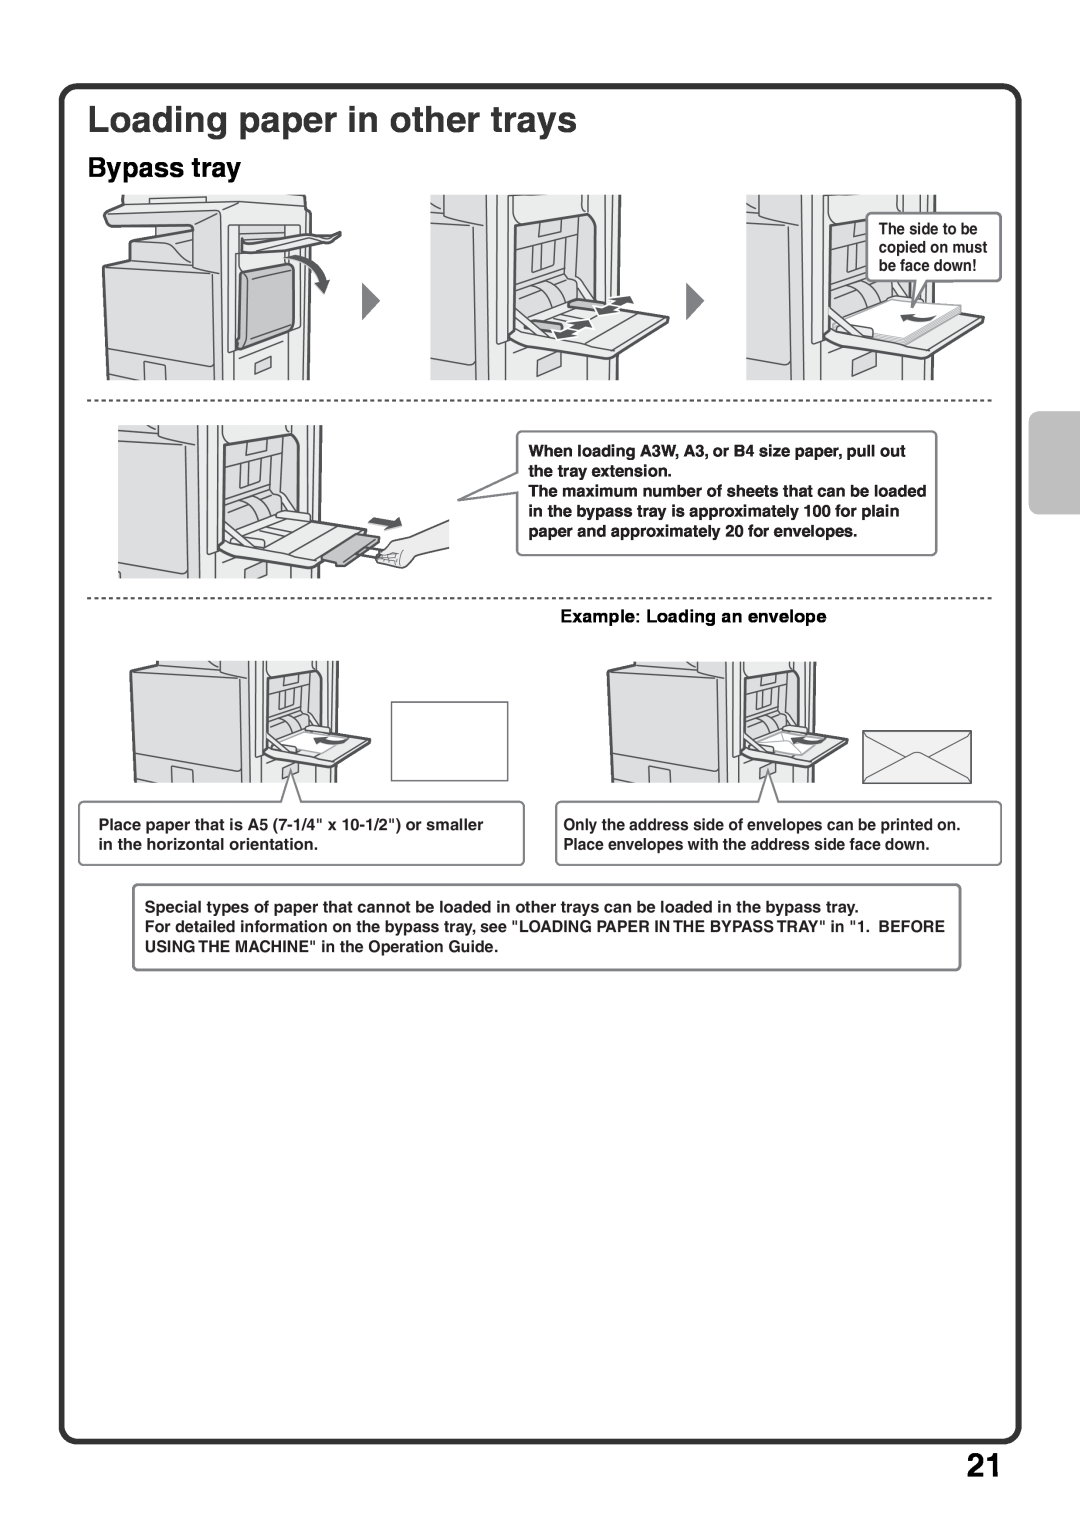 Sharp MX-5001N, MX-4100N, MX-5000N, MX-4101N Loading paper in other trays, Bypass tray, Example Loading an envelope 